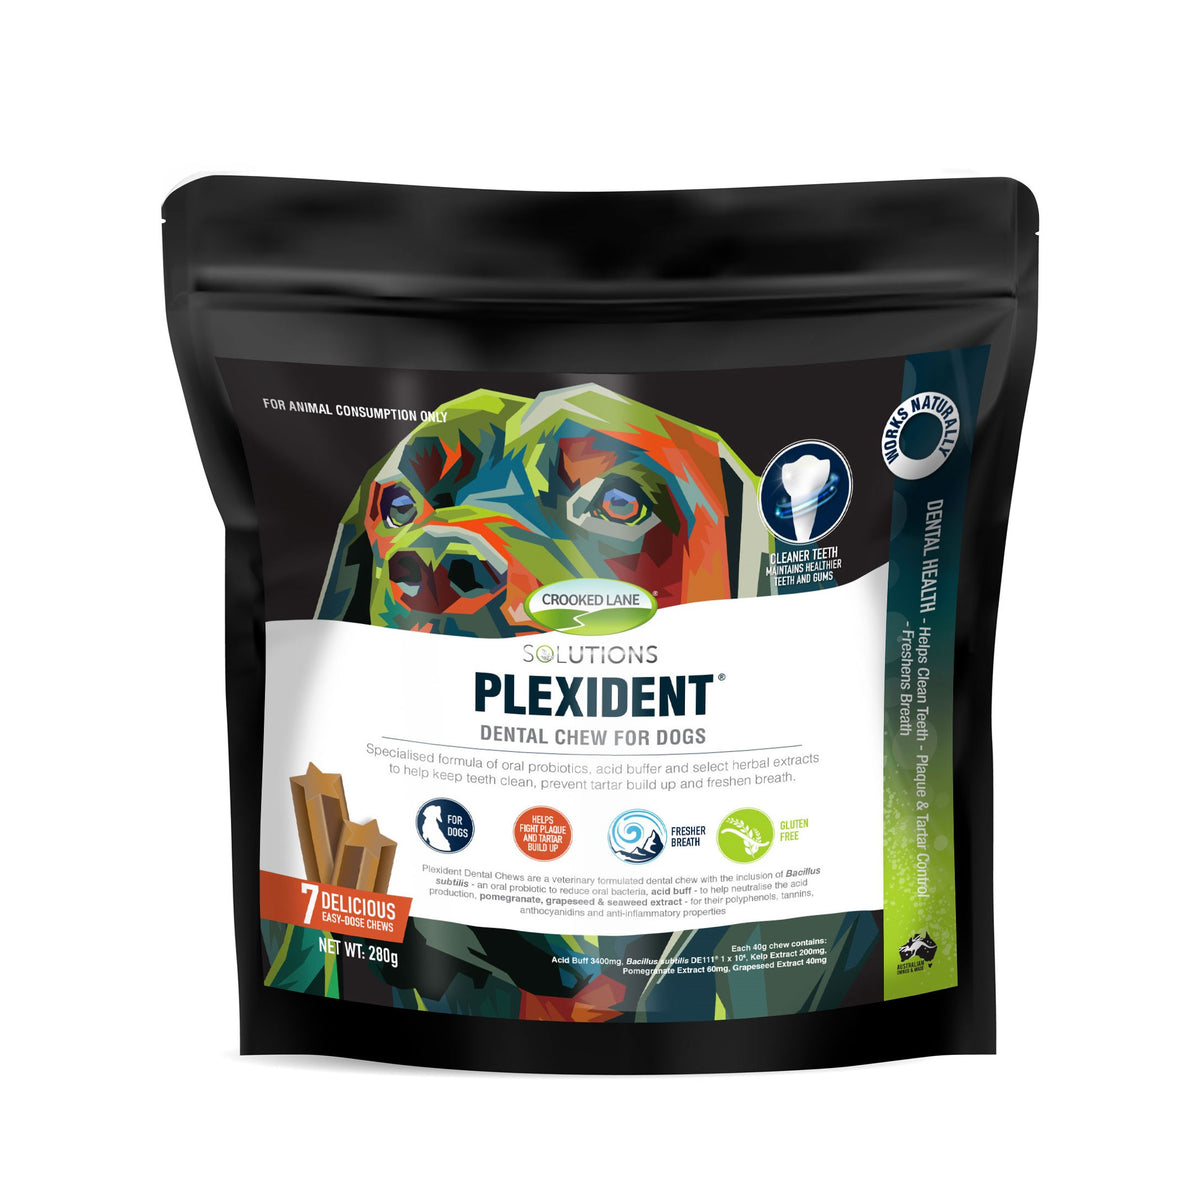 Crooked Lane Plexident Dental Chew for Dogs